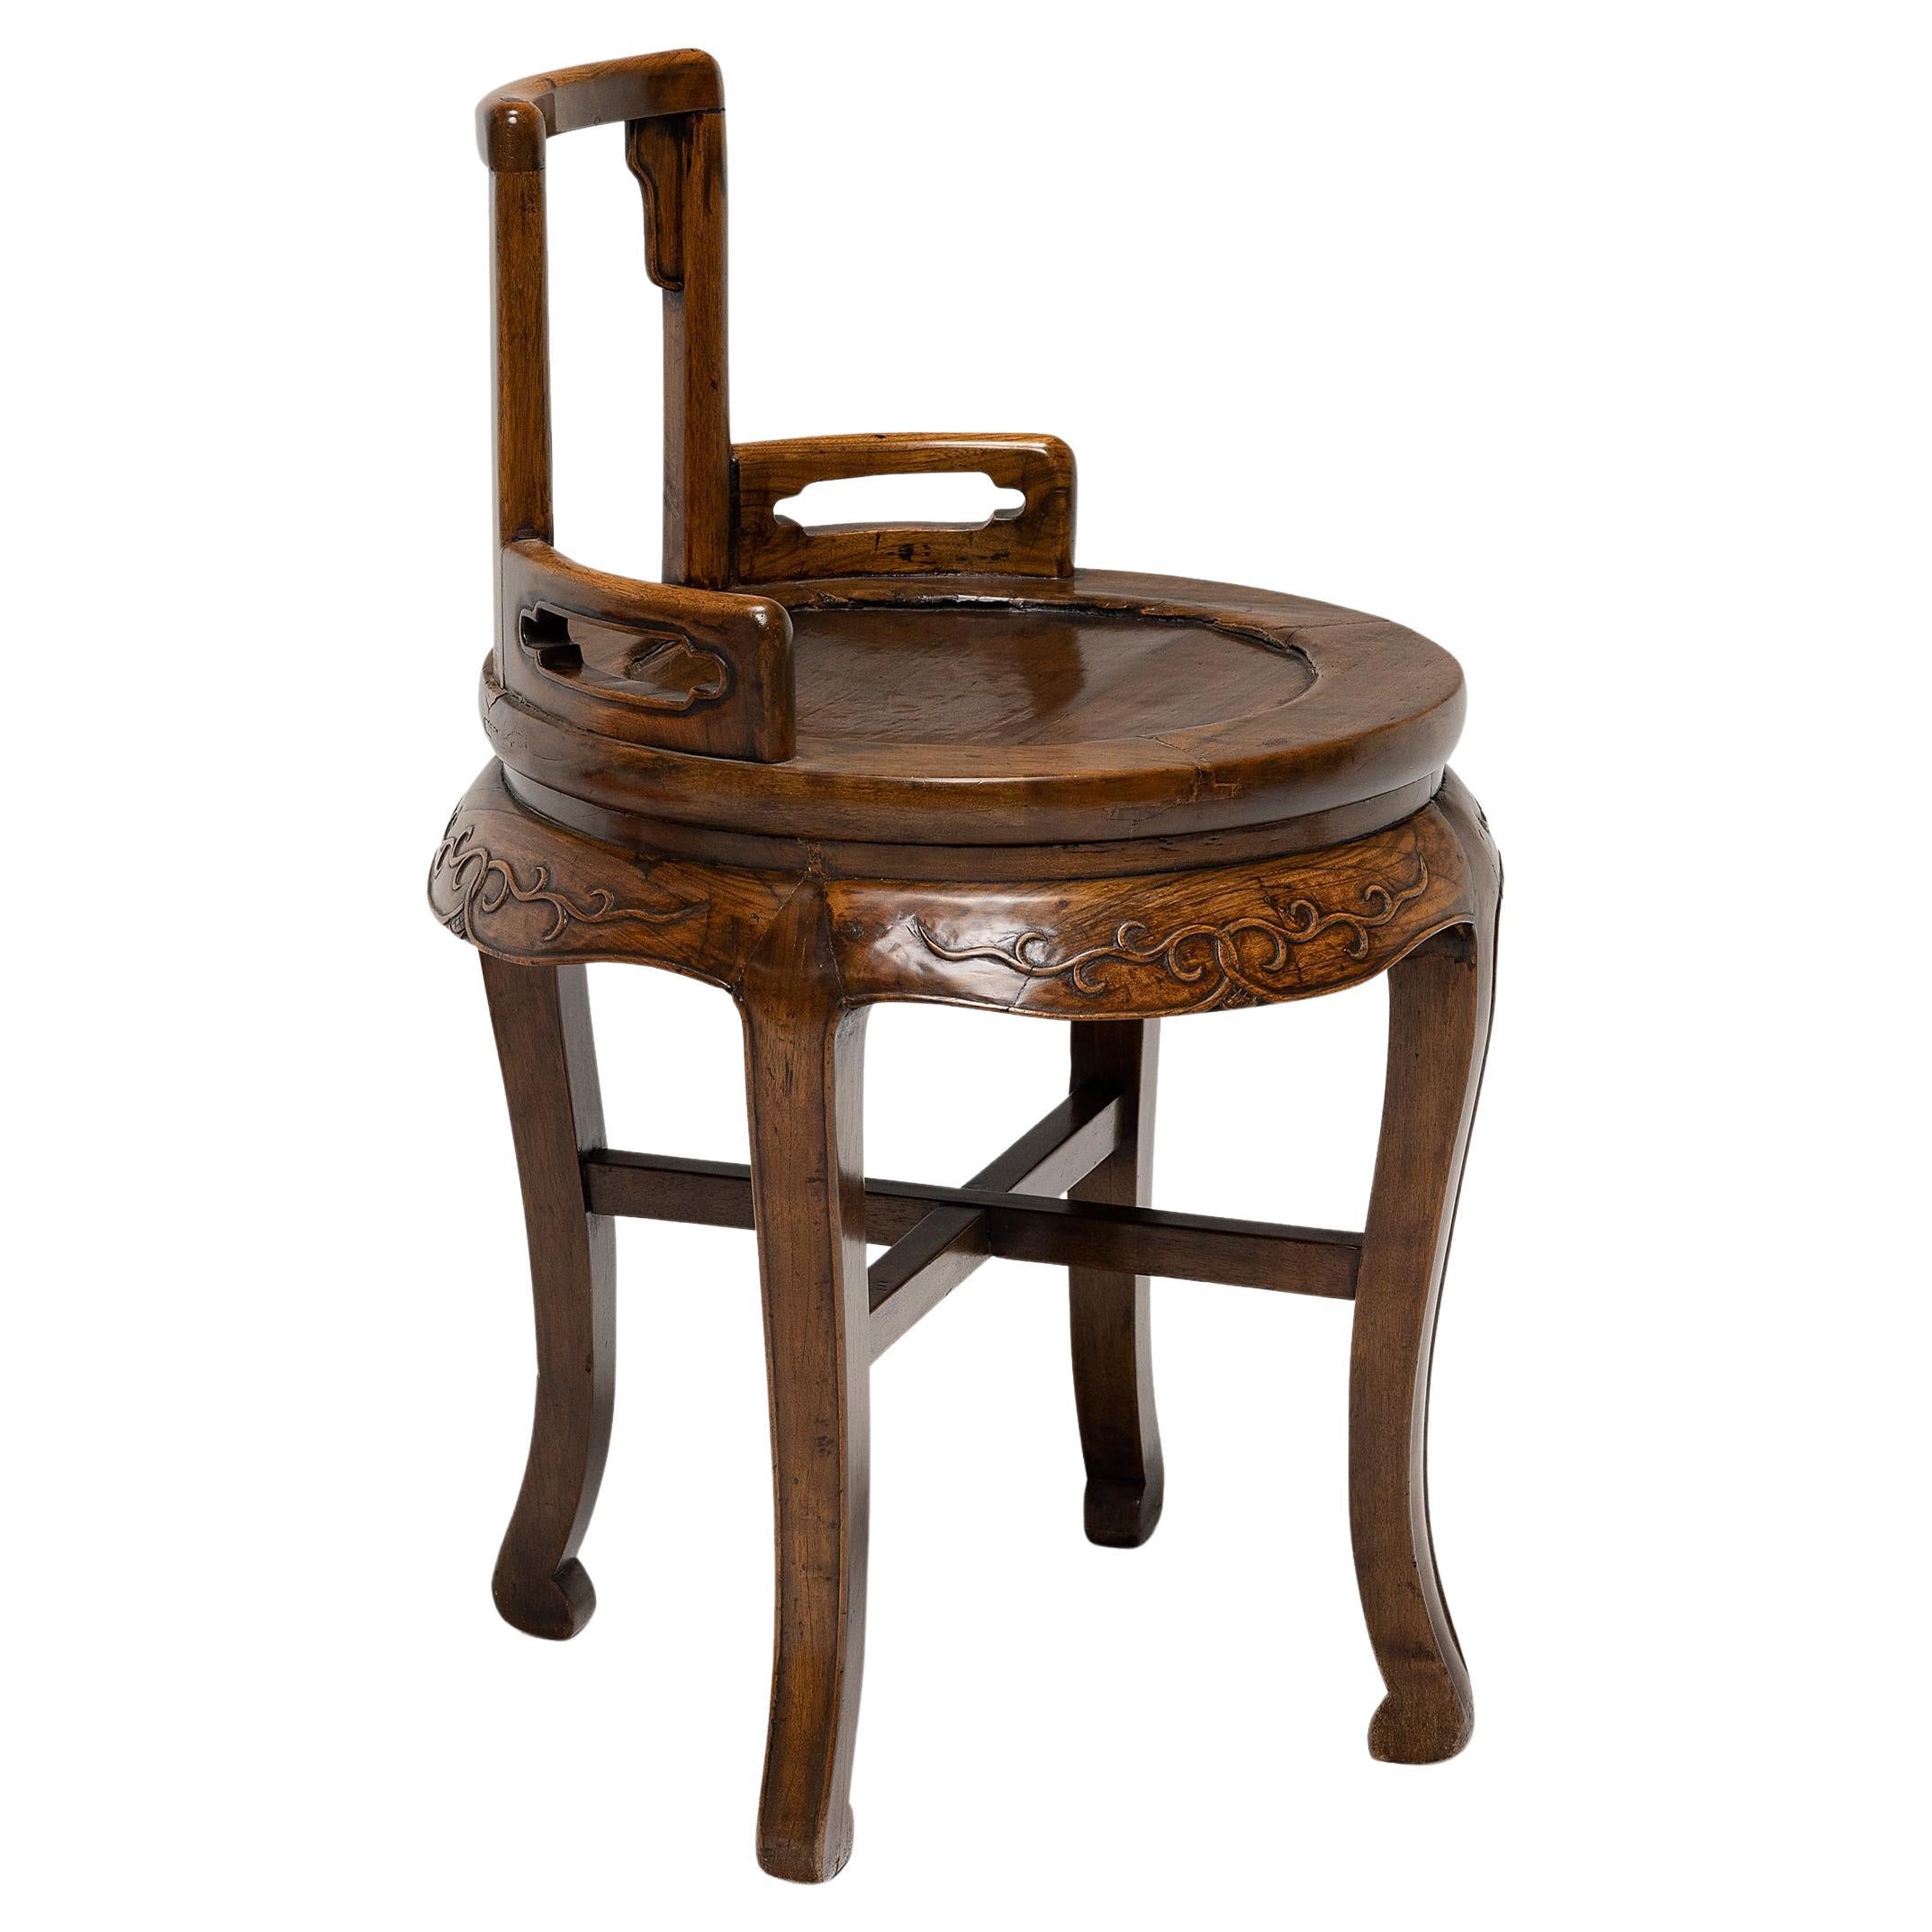 Chinese Rosewood Lady's Chair, c. 1900